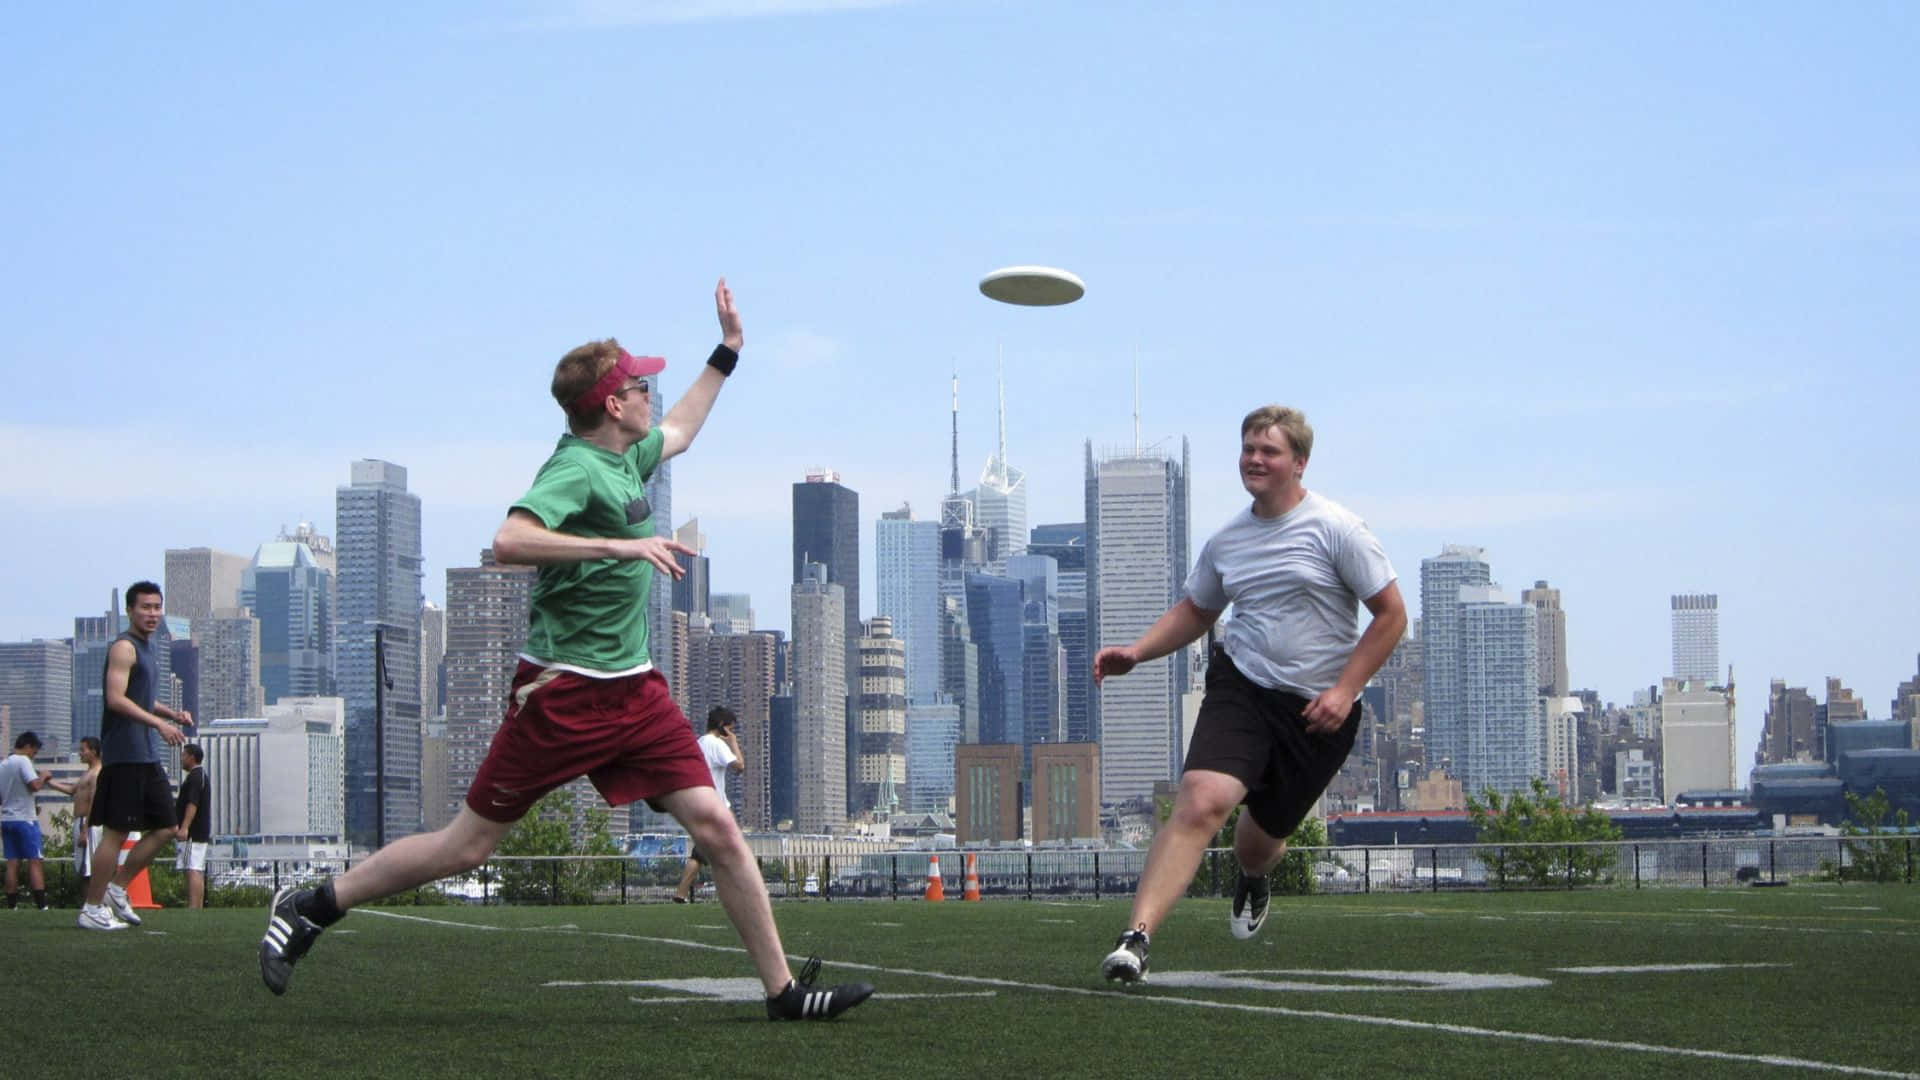 Find ultimate satisfaction and exhilaration with a game of Hd Frisbee